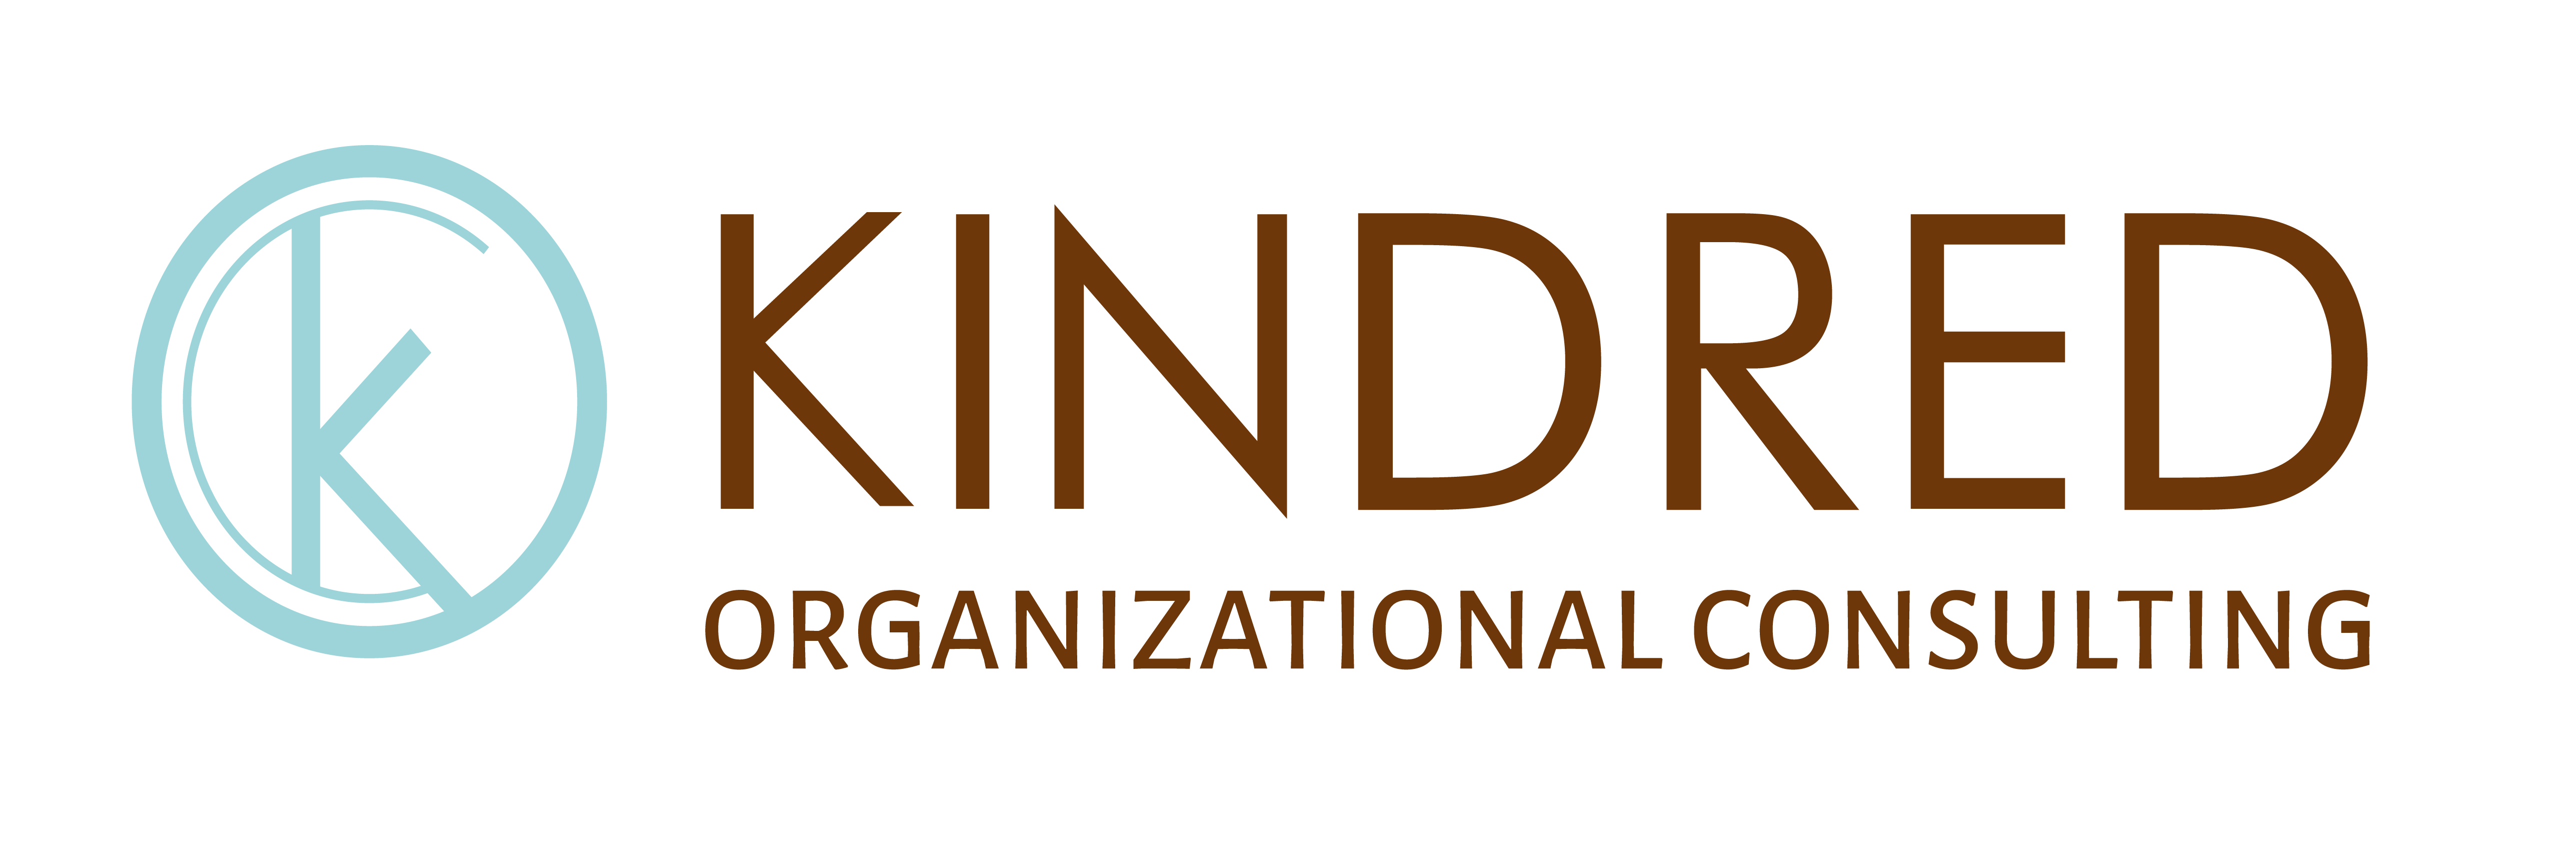 Kindred Organizational Consulting Logo